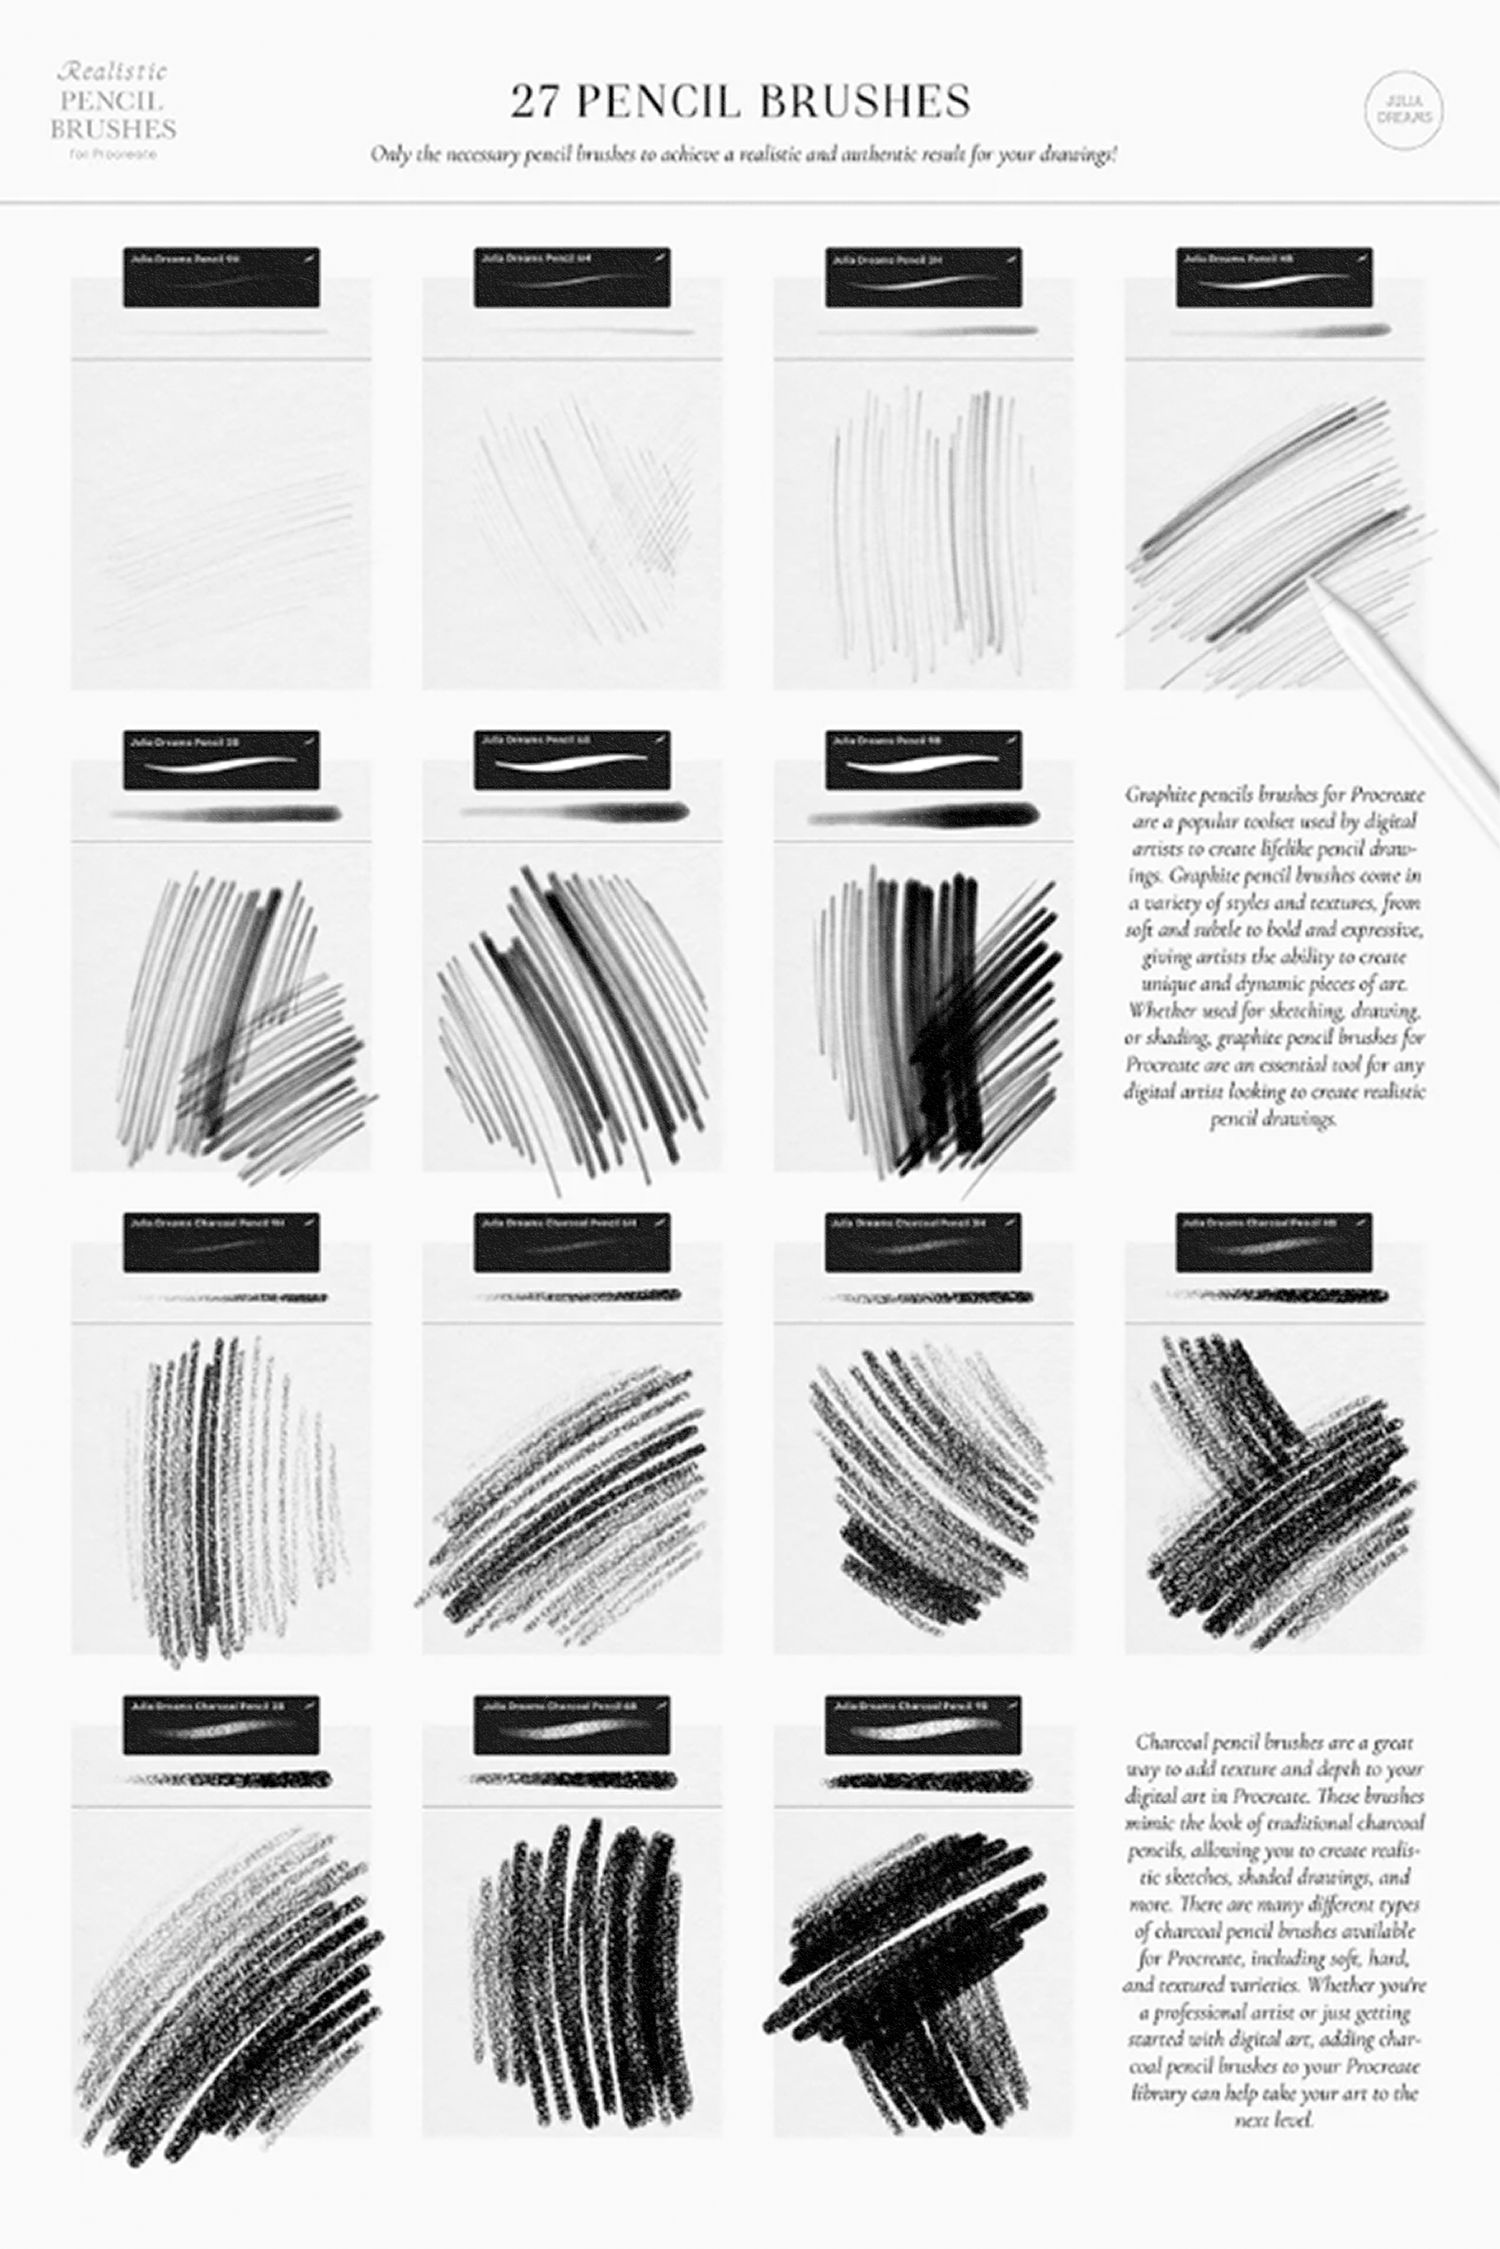 Realistic Pencil Brushes by Julia Dreams